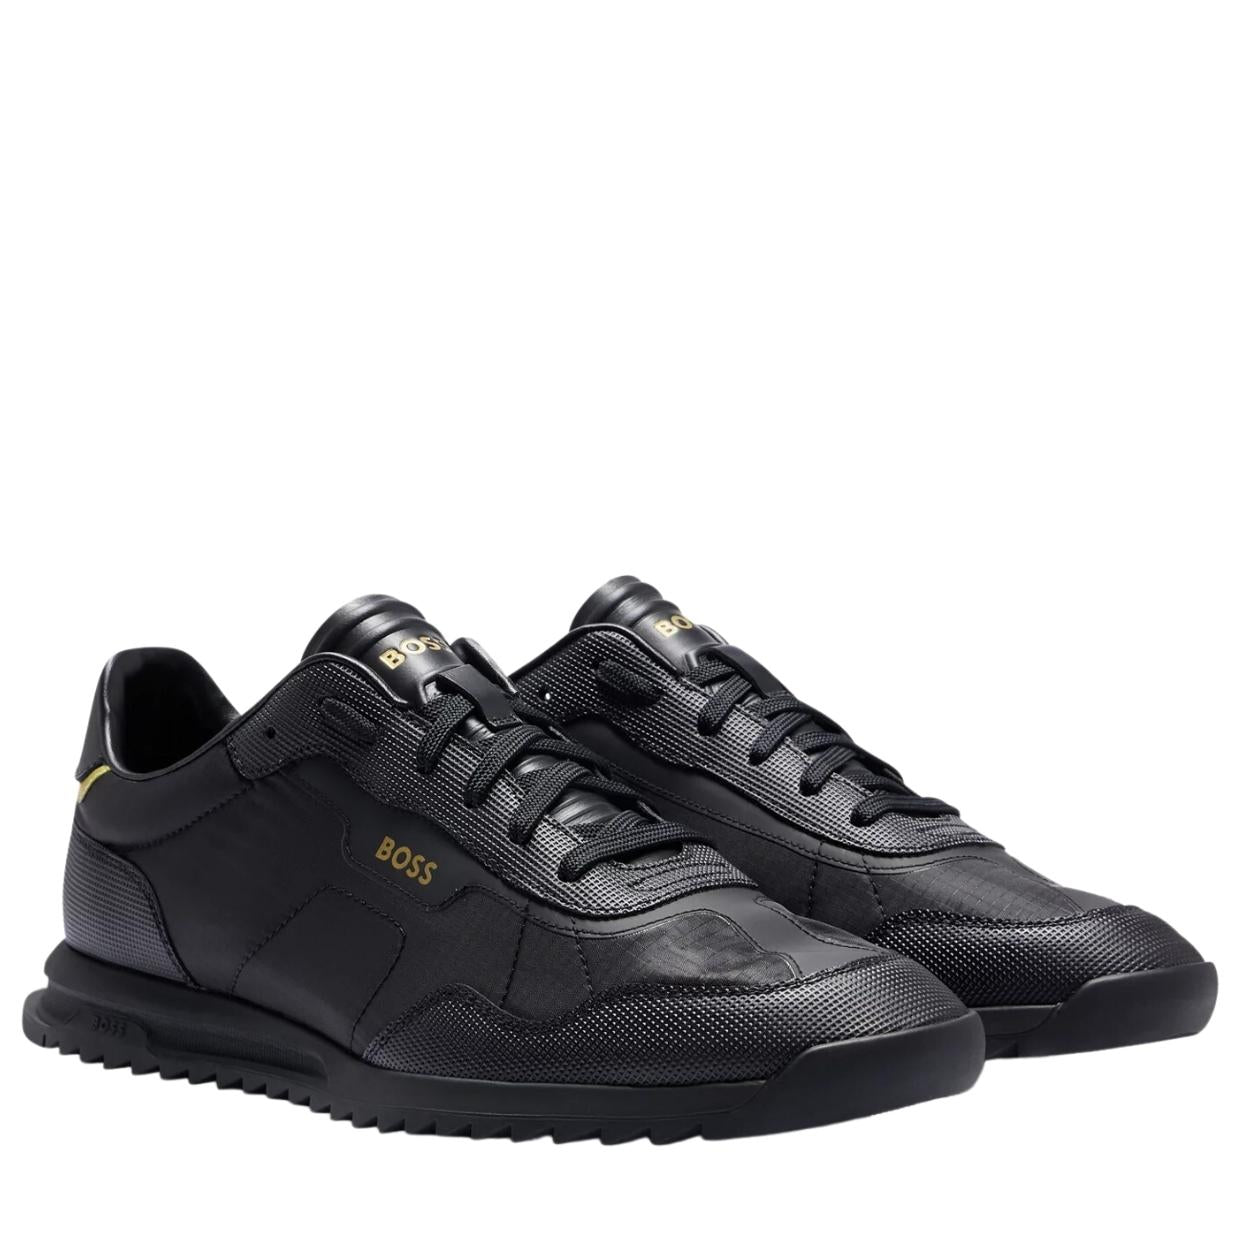 BOSS Zayn Mixed Material Perforated Faux Leather Black Trainers